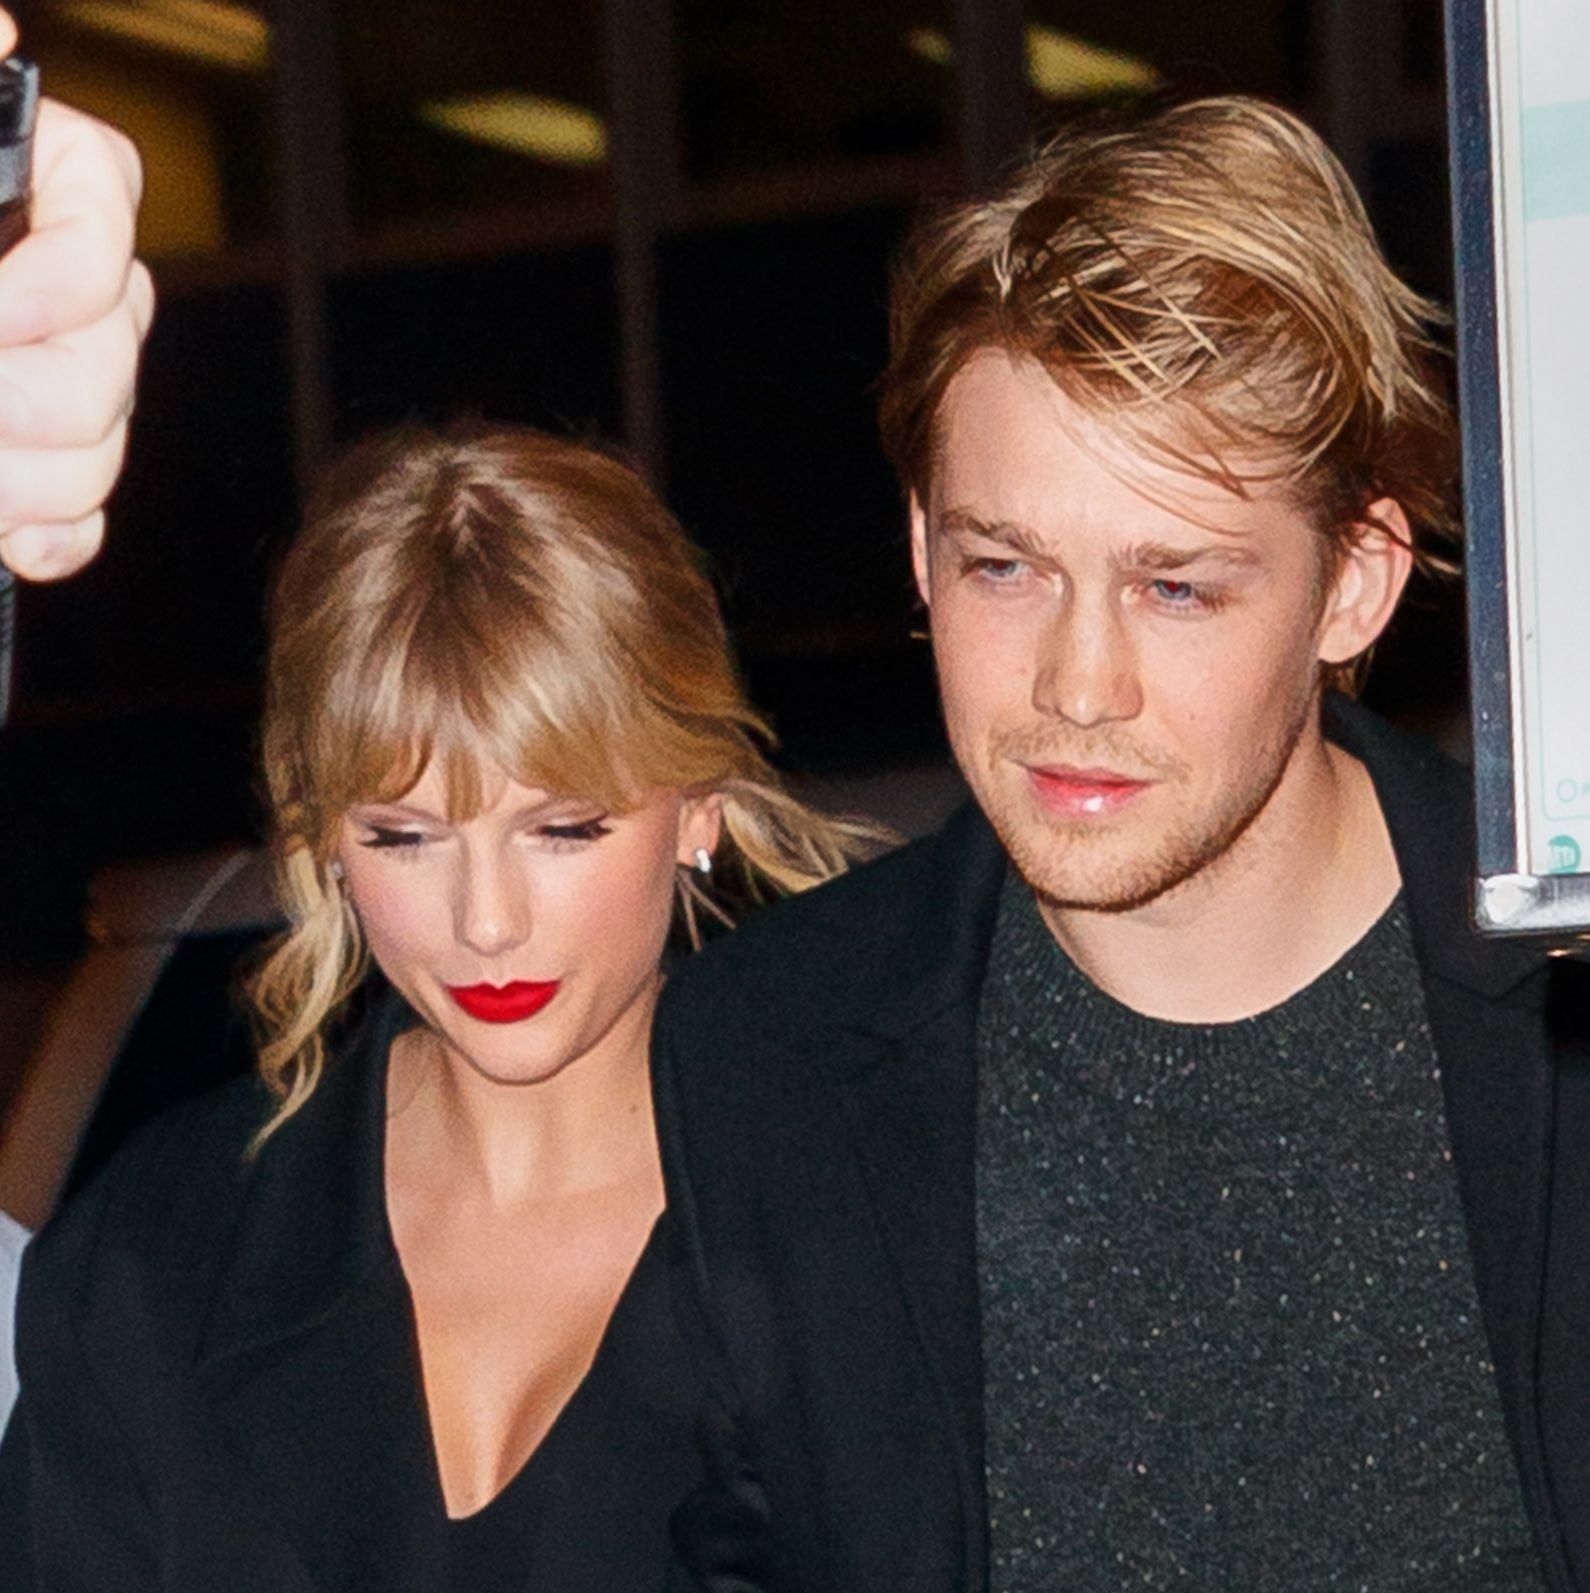 Swift hardly ever speaks about her relationship—and rarely this candidly.